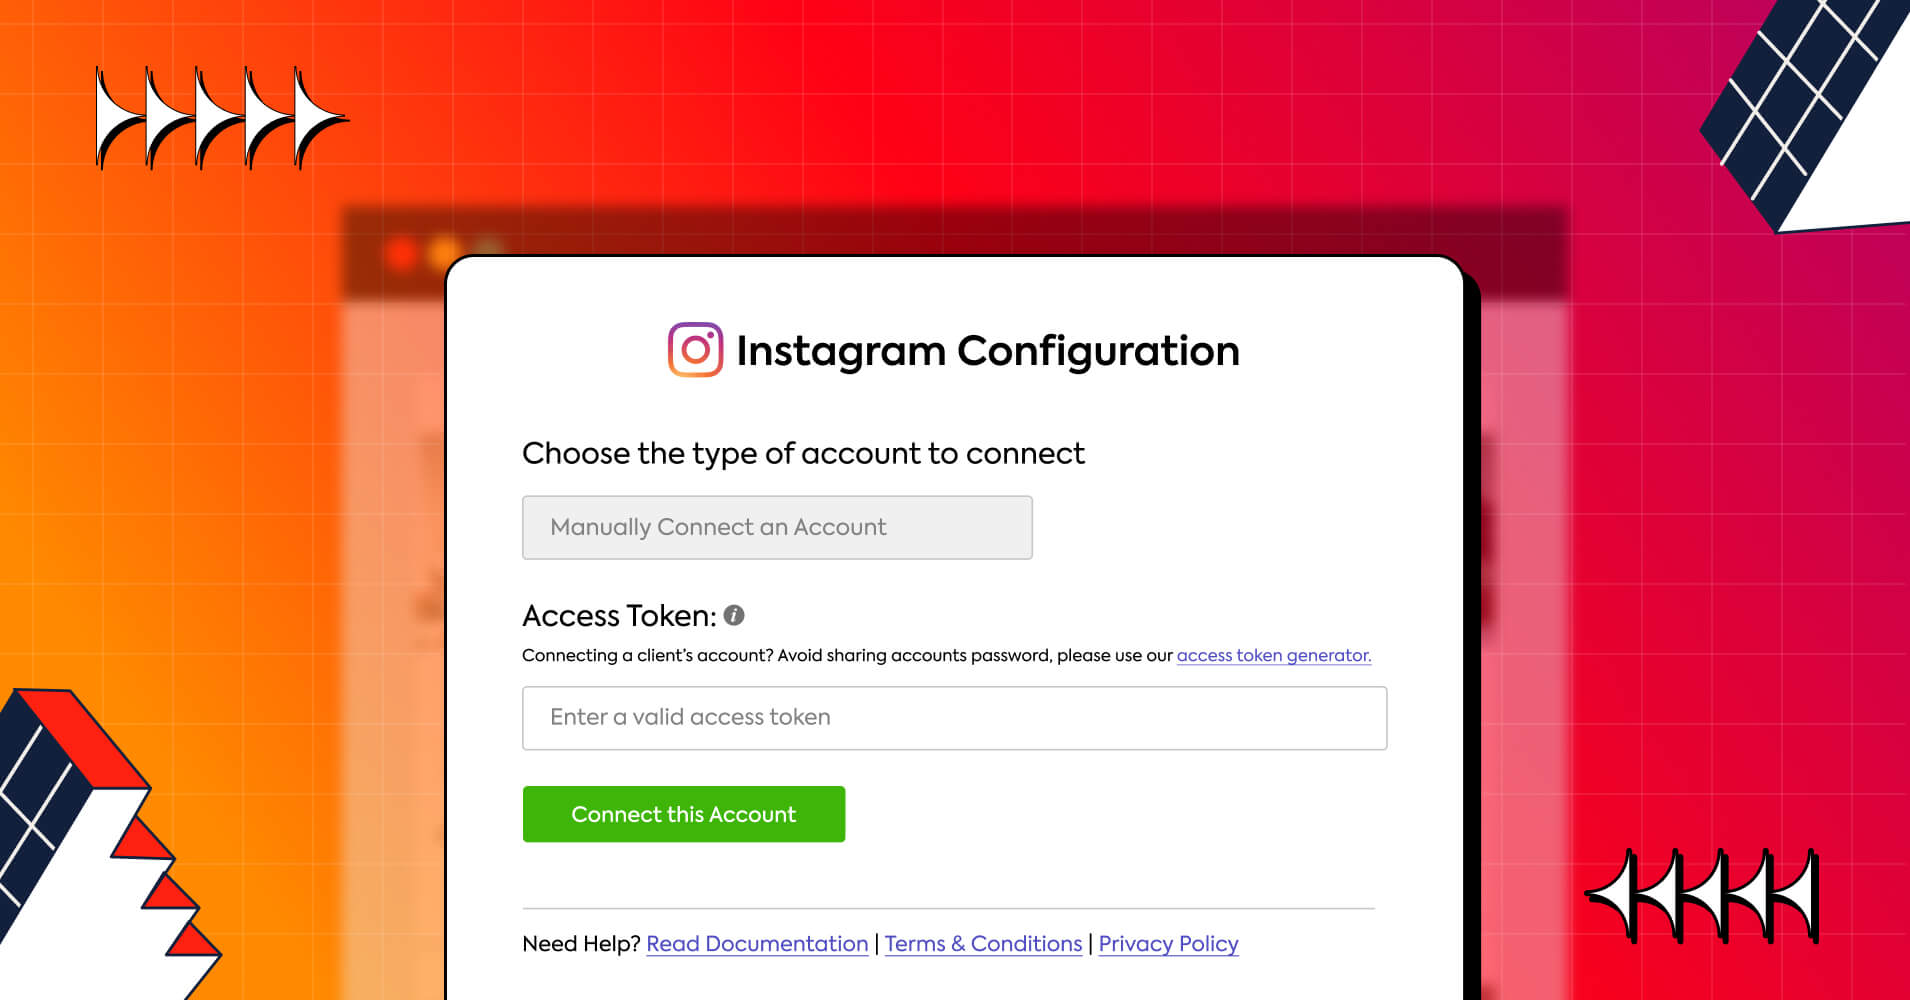 Manually connect Instagram does not require a password to connect.